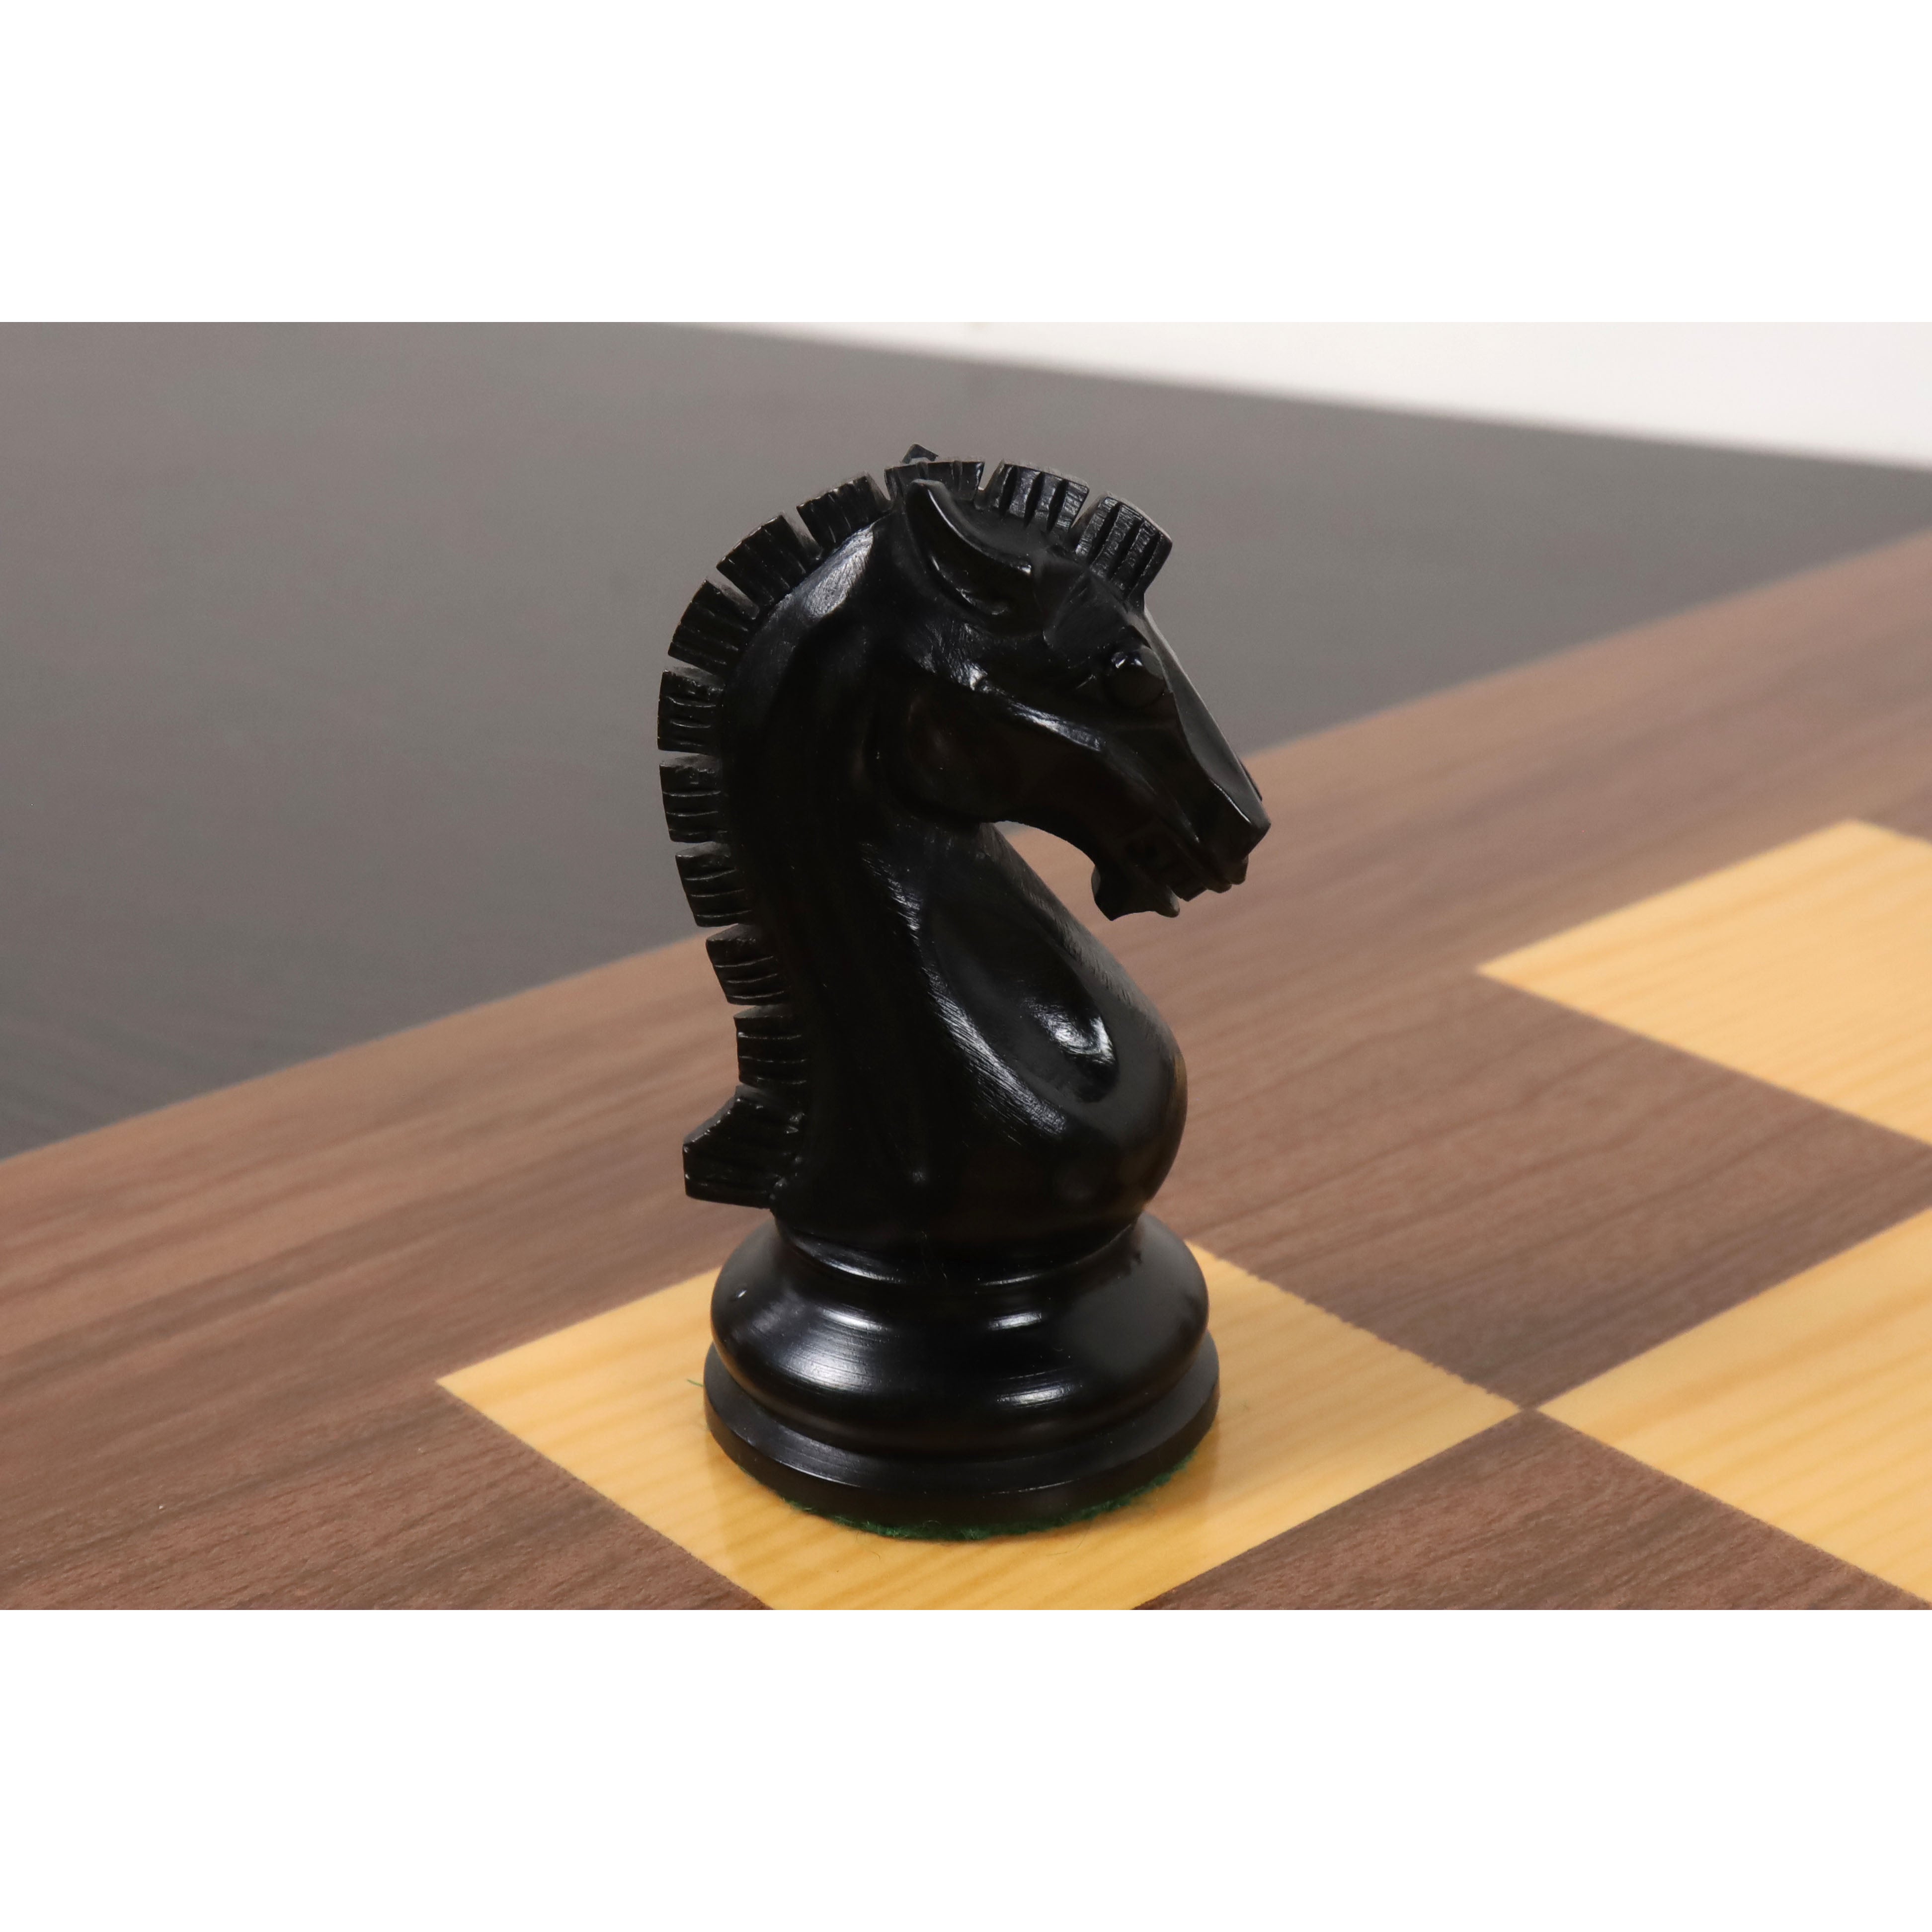 Slightly Imperfect 2021 Sinquefield Cup Reproduced Staunton Chess Pieces Only set - Triple weighted Ebony Wood